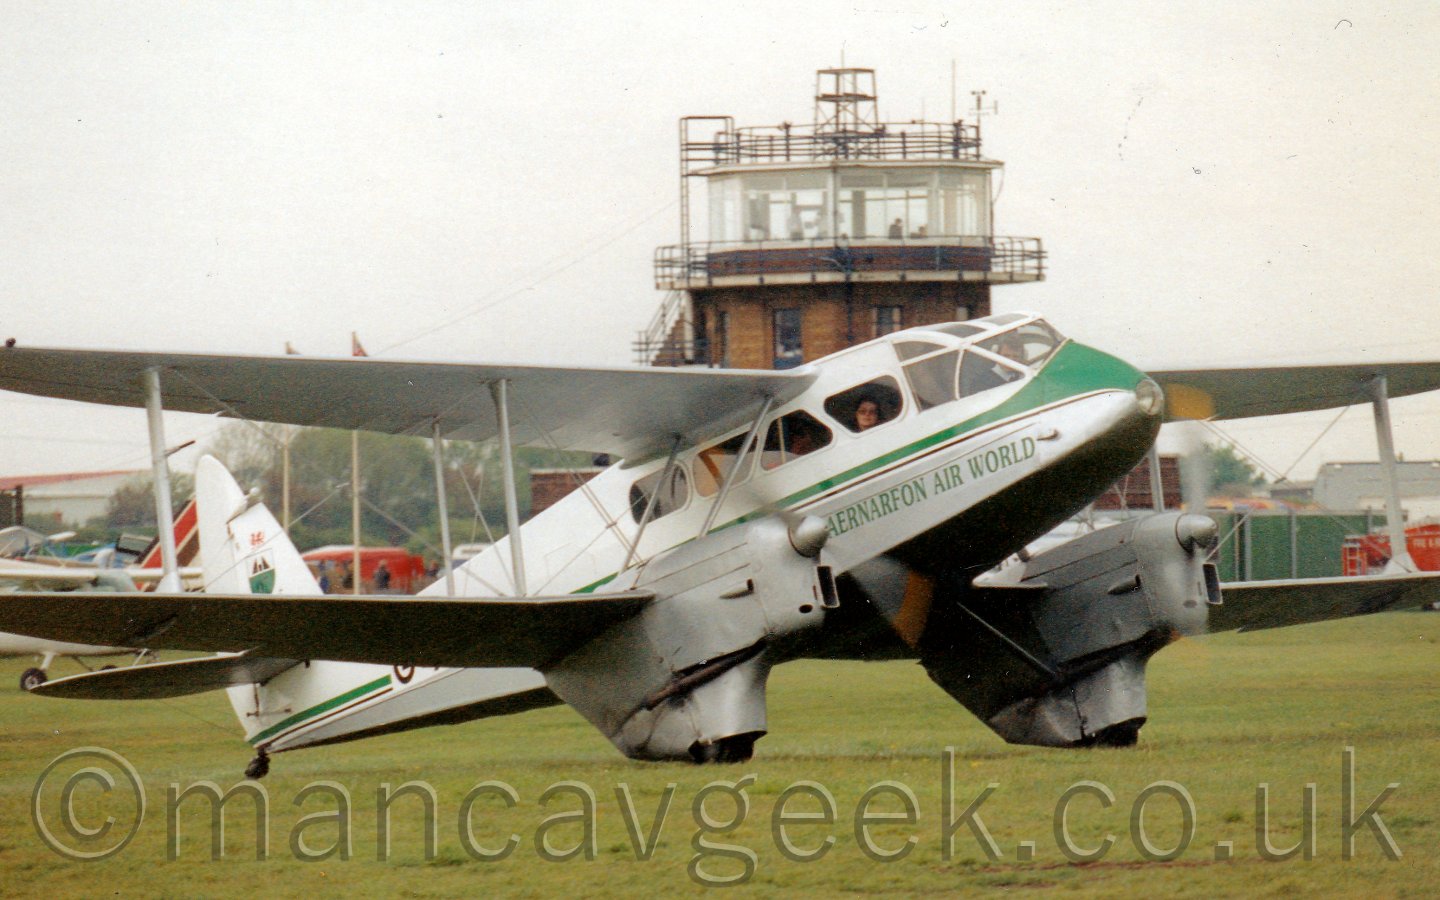 Side view of a twin engined biplane airliner taxiing from left to right on a grass airfield. The plane is mostly white, with a grey belly, and a green and black cheatline running aling the body. There are "Caernarfon Air World" titles on the lower forward fuselage in green. The forward fuselage and cockpit are extensively glazed, with the pilot visible right at the front, and a woman with dark hair in the front right passenger seat looking out towards the camera. In the background, a brown brick building with the top floor completely glazed dominates the middle of the frame, withlaight aircraft and vehicles clustered around it, with trees in the distance, under a grey sky.